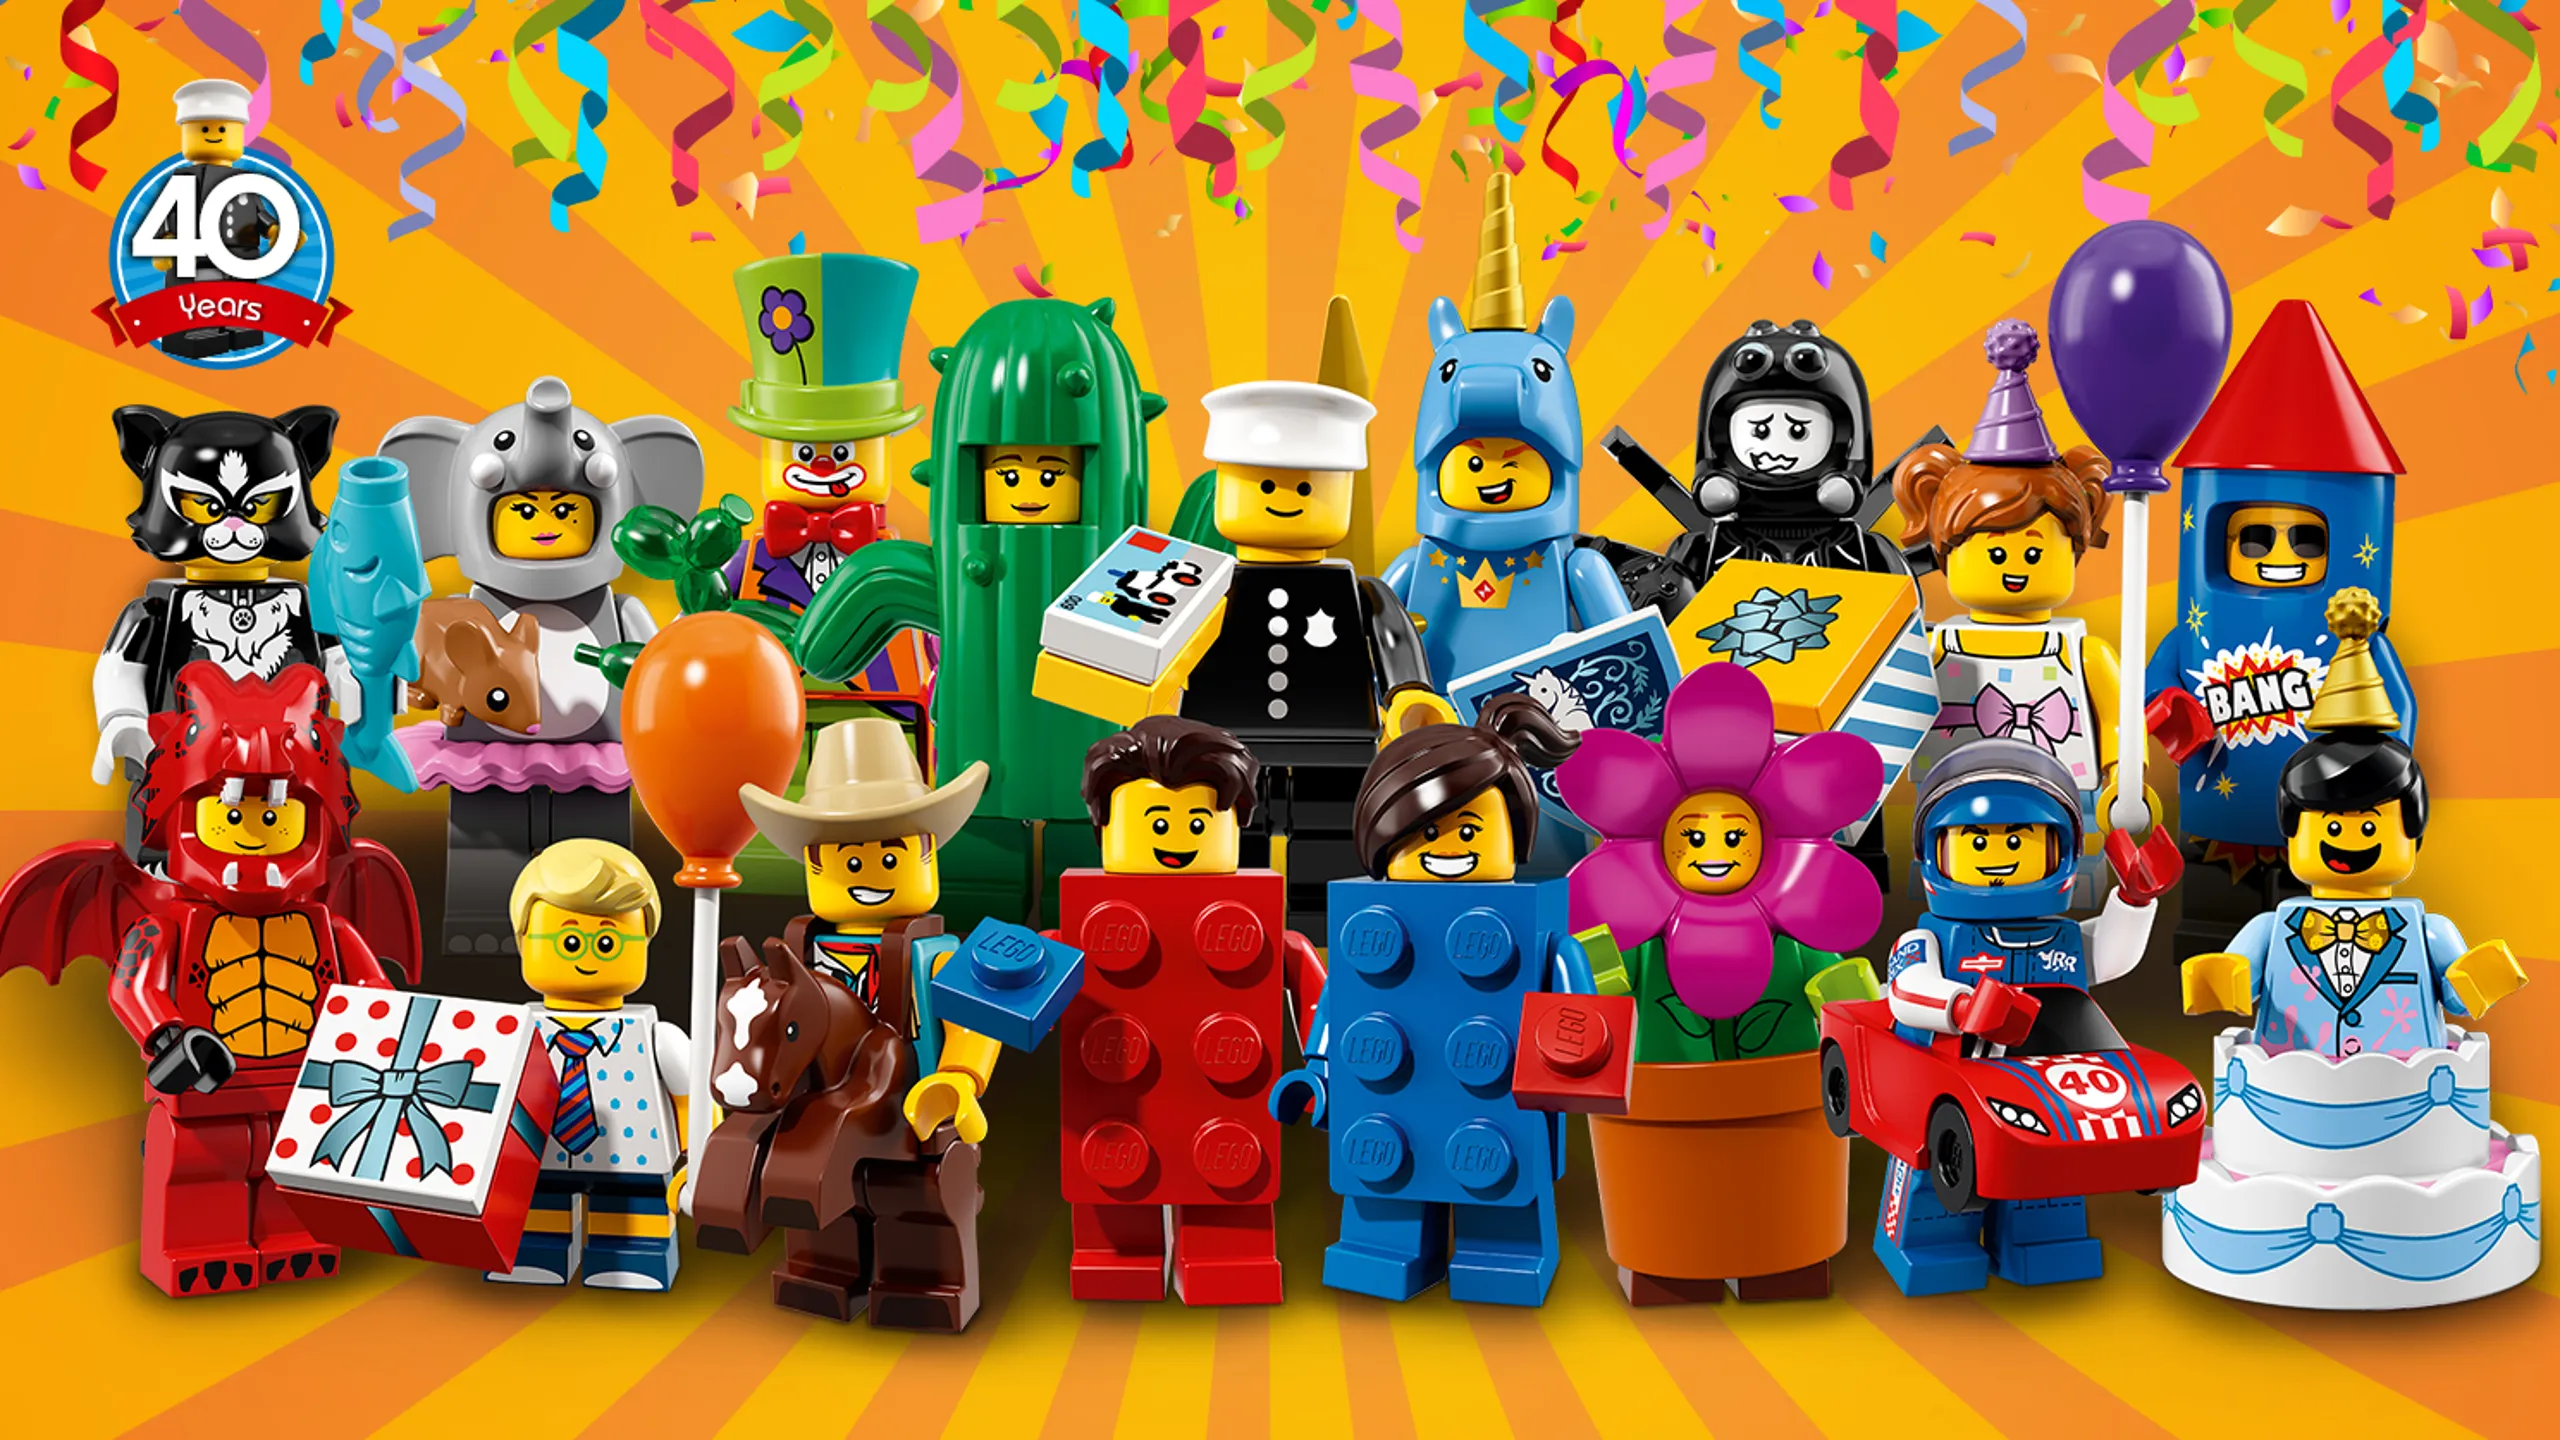 LEGO Minifigures - 71021 Series 18: Party - Collect the party characters from LEGO Minifigures Party series celebrating the 40th birthday of the LEGO Minifigure!